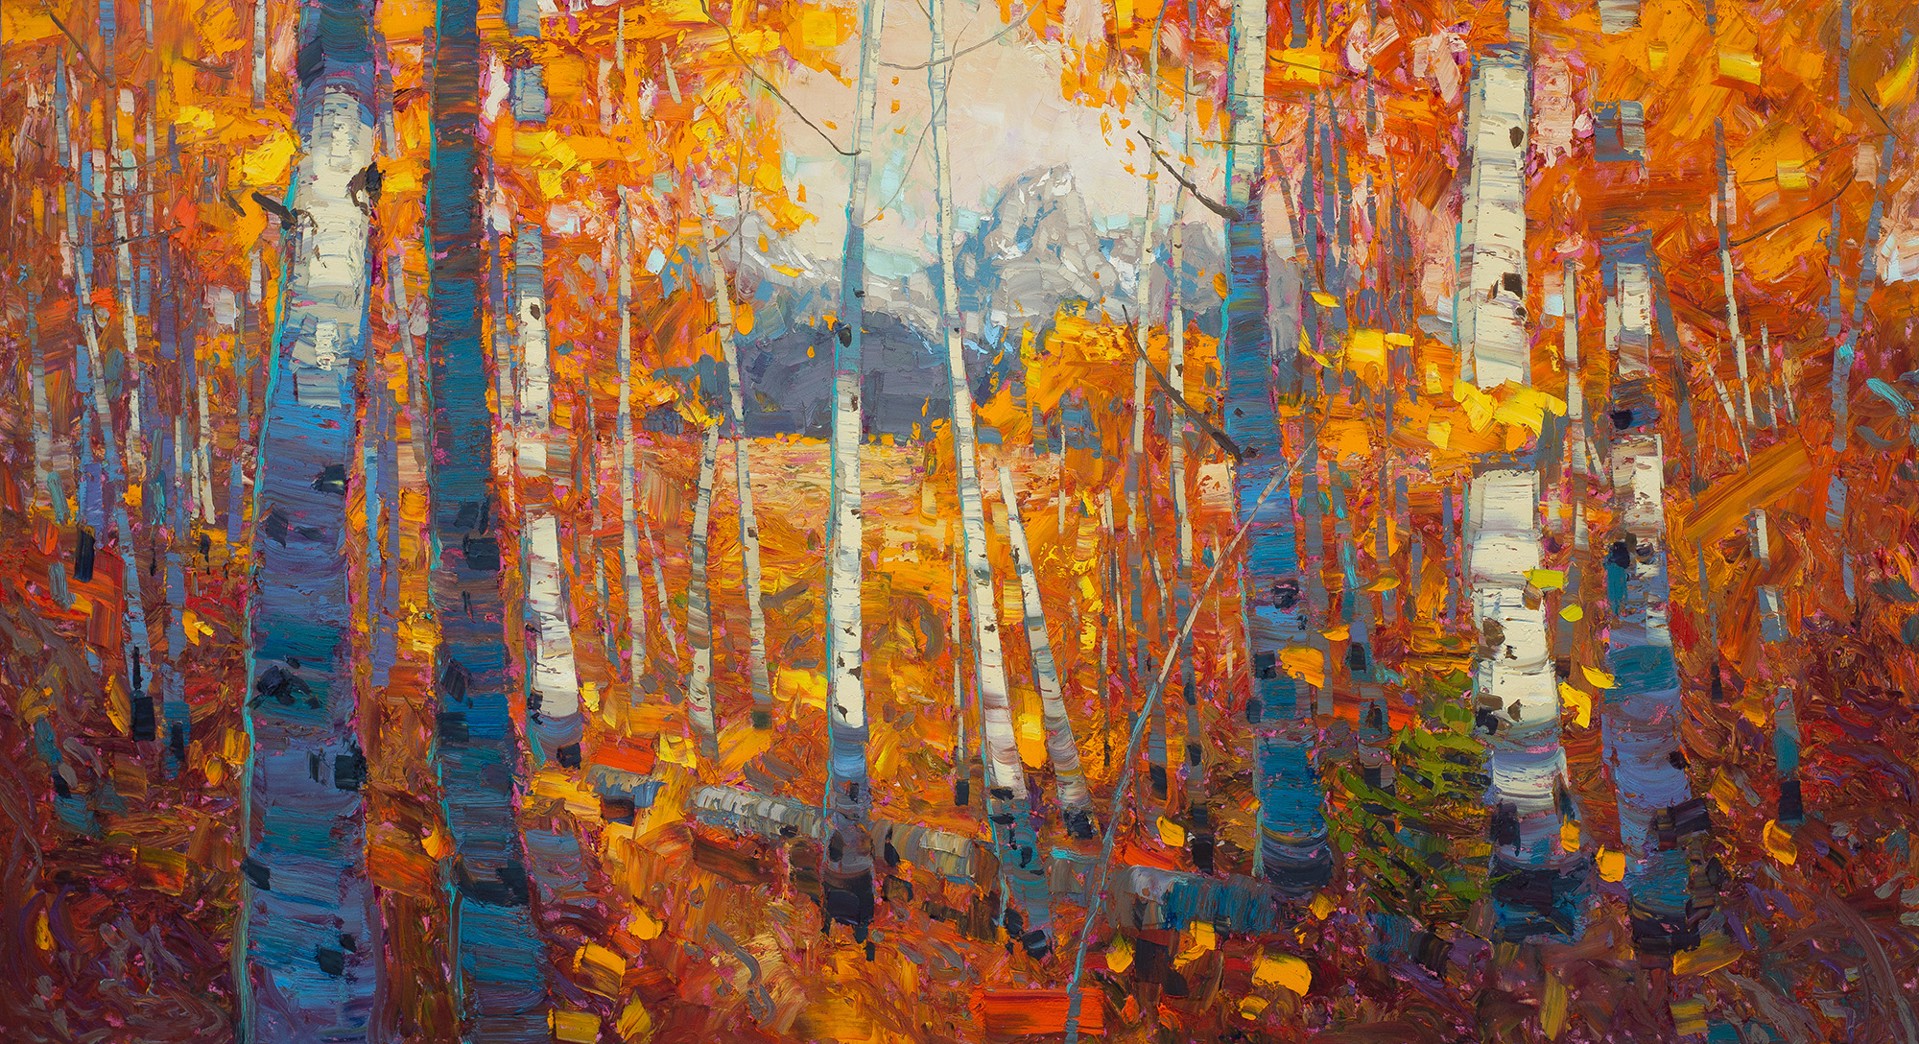 Original Oil Painting By Silas Thompson Of The Tetons Framed With Orange And Yellow Aspens